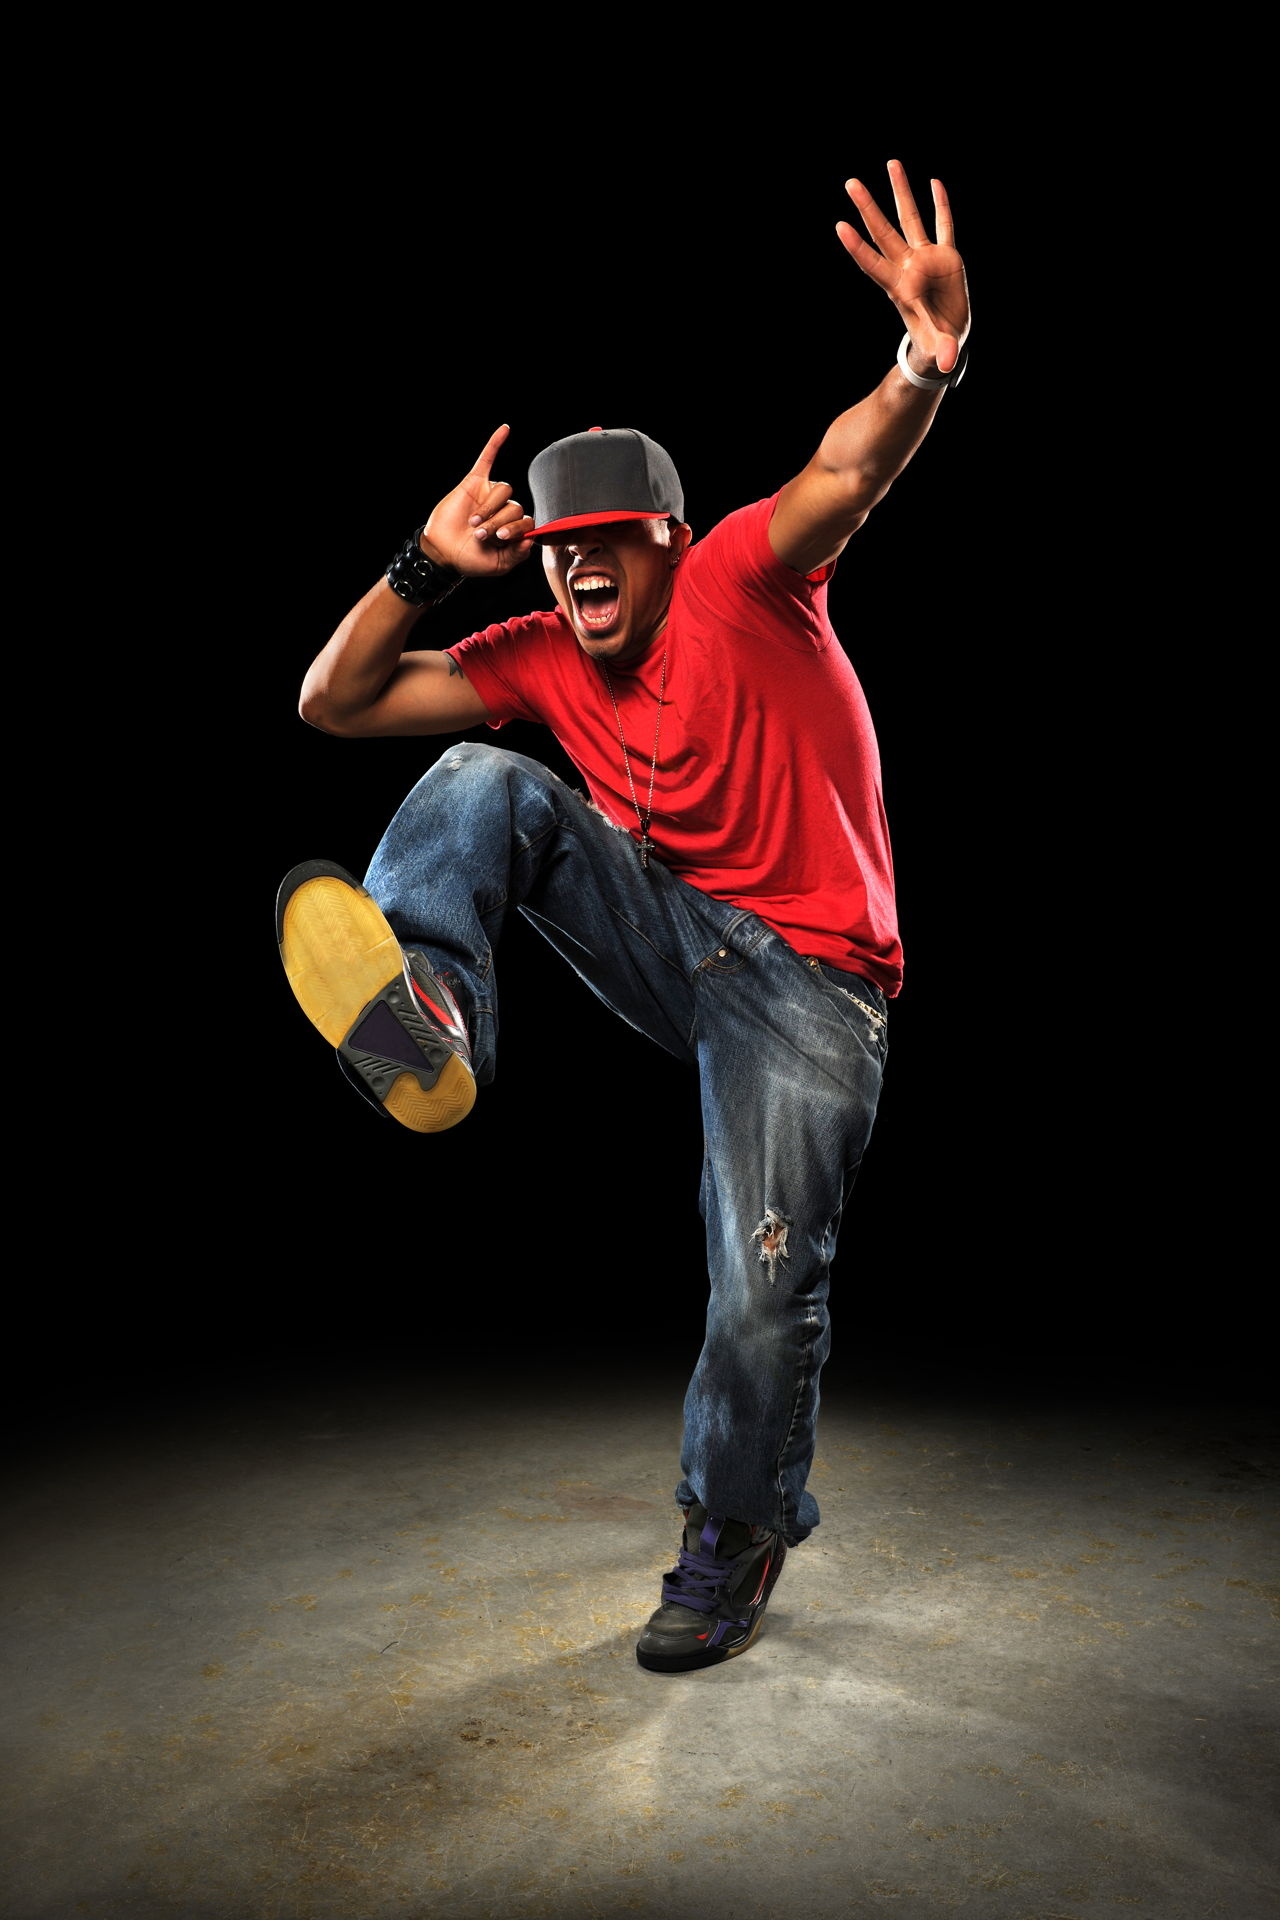 Popping Dance: Hip Hop dance moves, One of the original funk styles that came from California during the 1960s-70s. 1280x1920 HD Wallpaper.